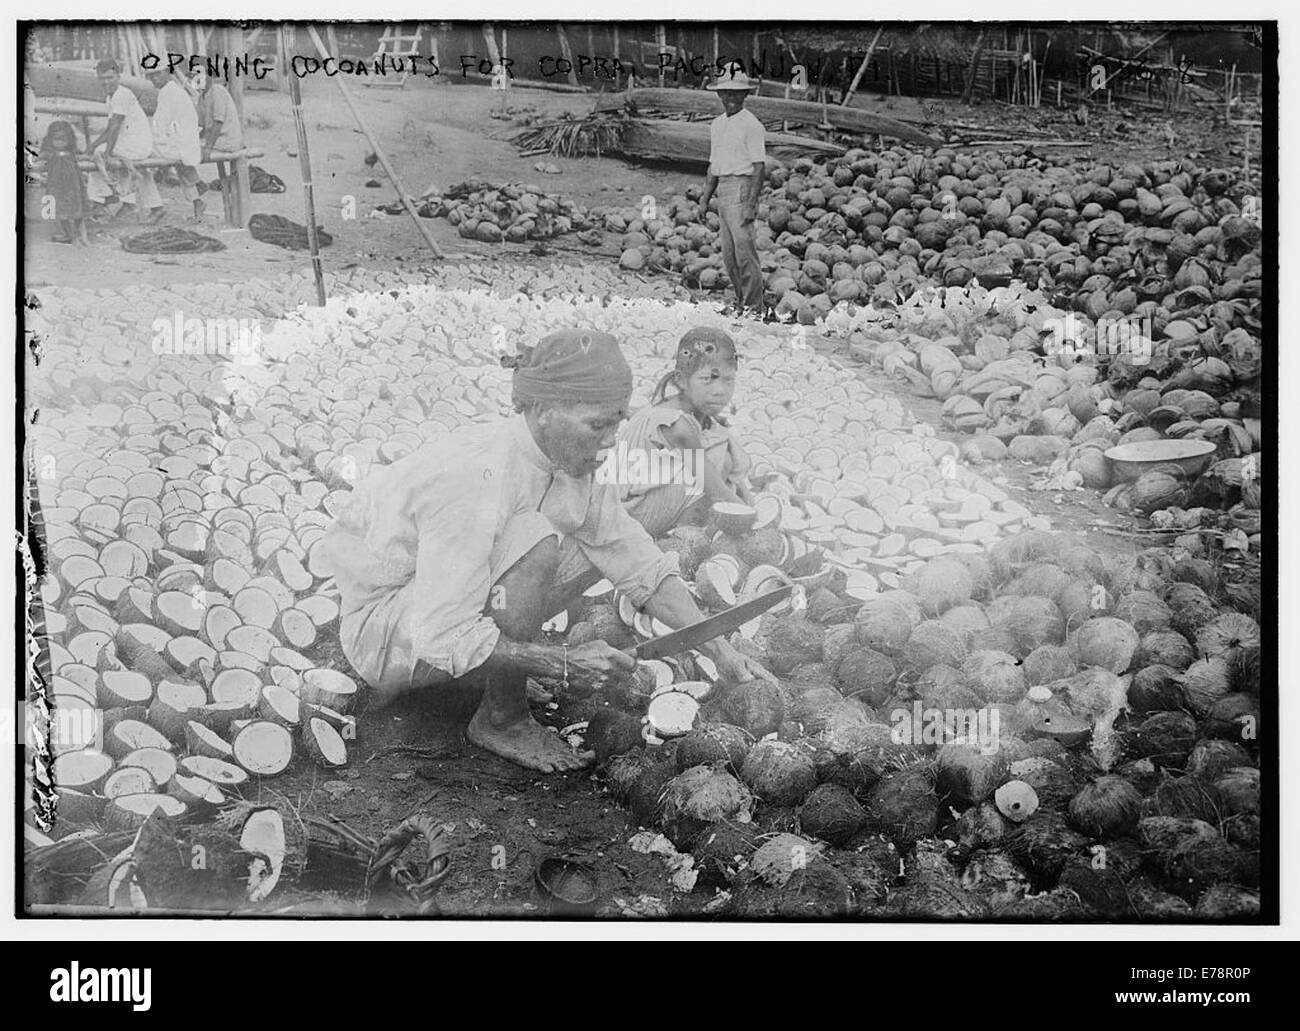 Opening Coconuts for Copra, Pagsanjan, Stock Photo